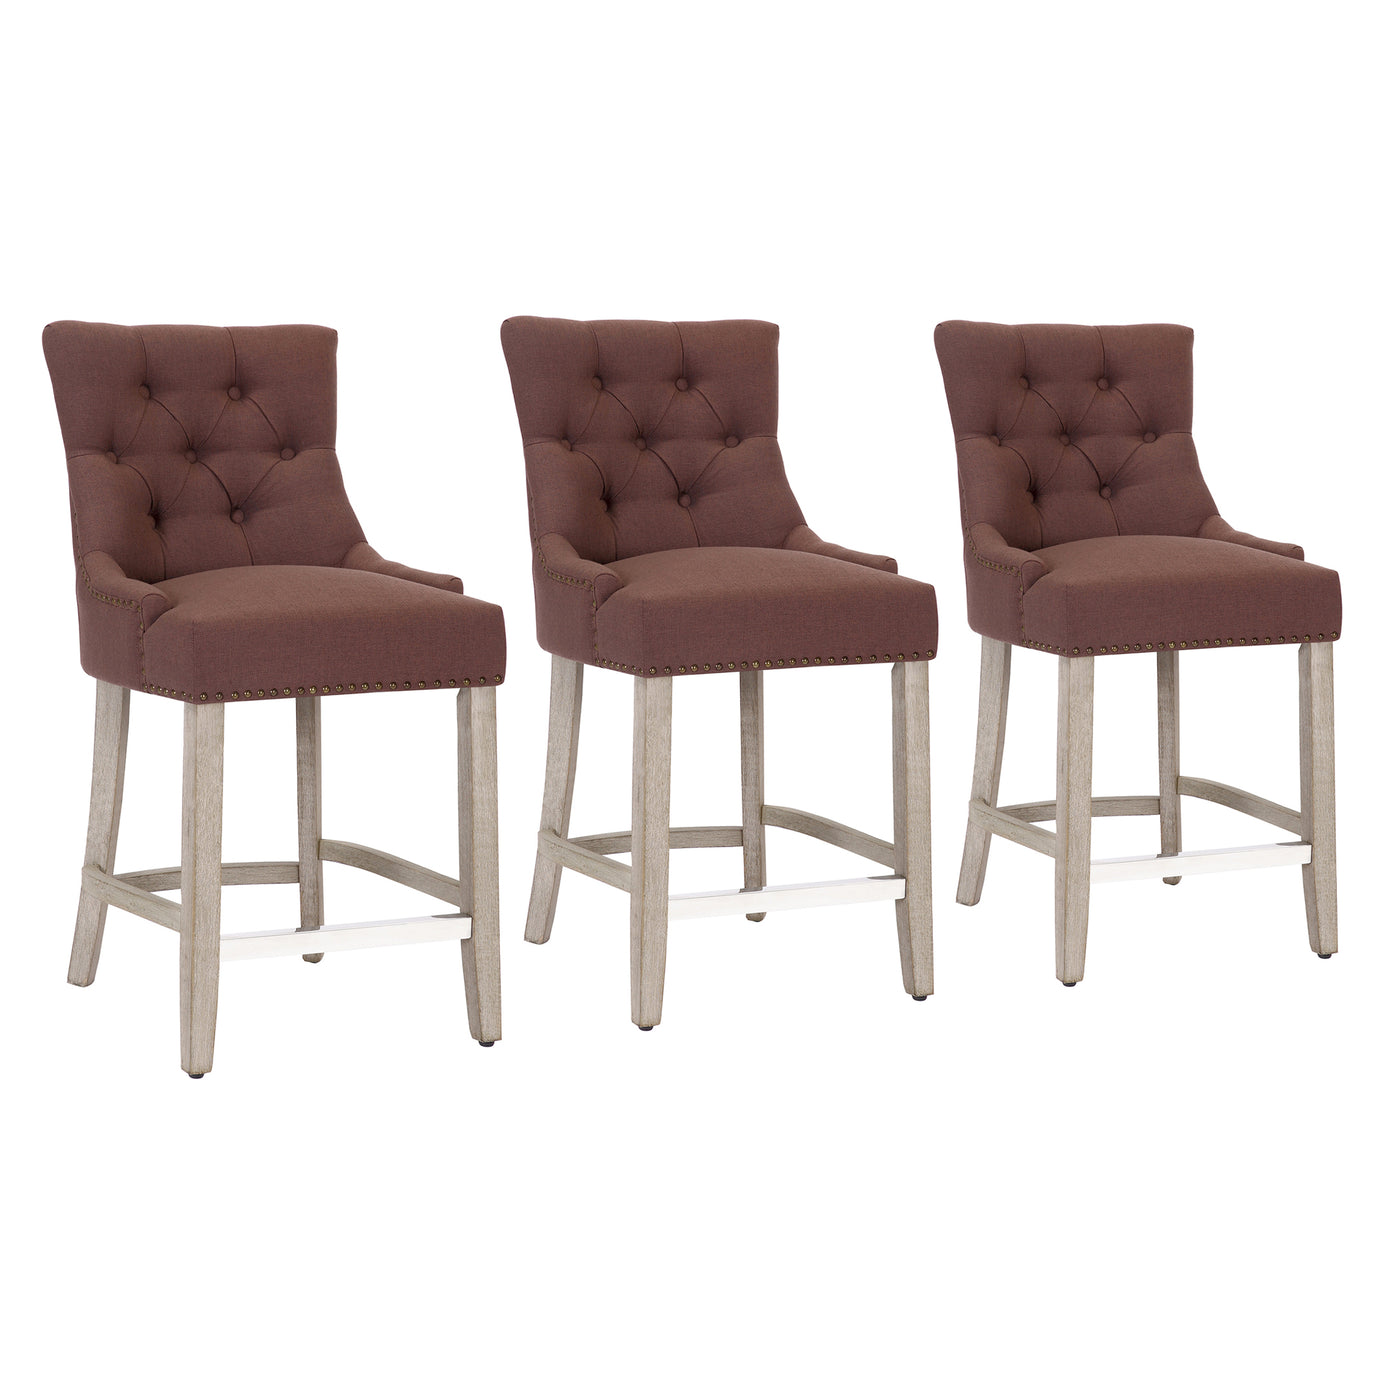 Hayes 24" Upholstered Tufted Wood Bar Stool (Set of 3), Antique Gray